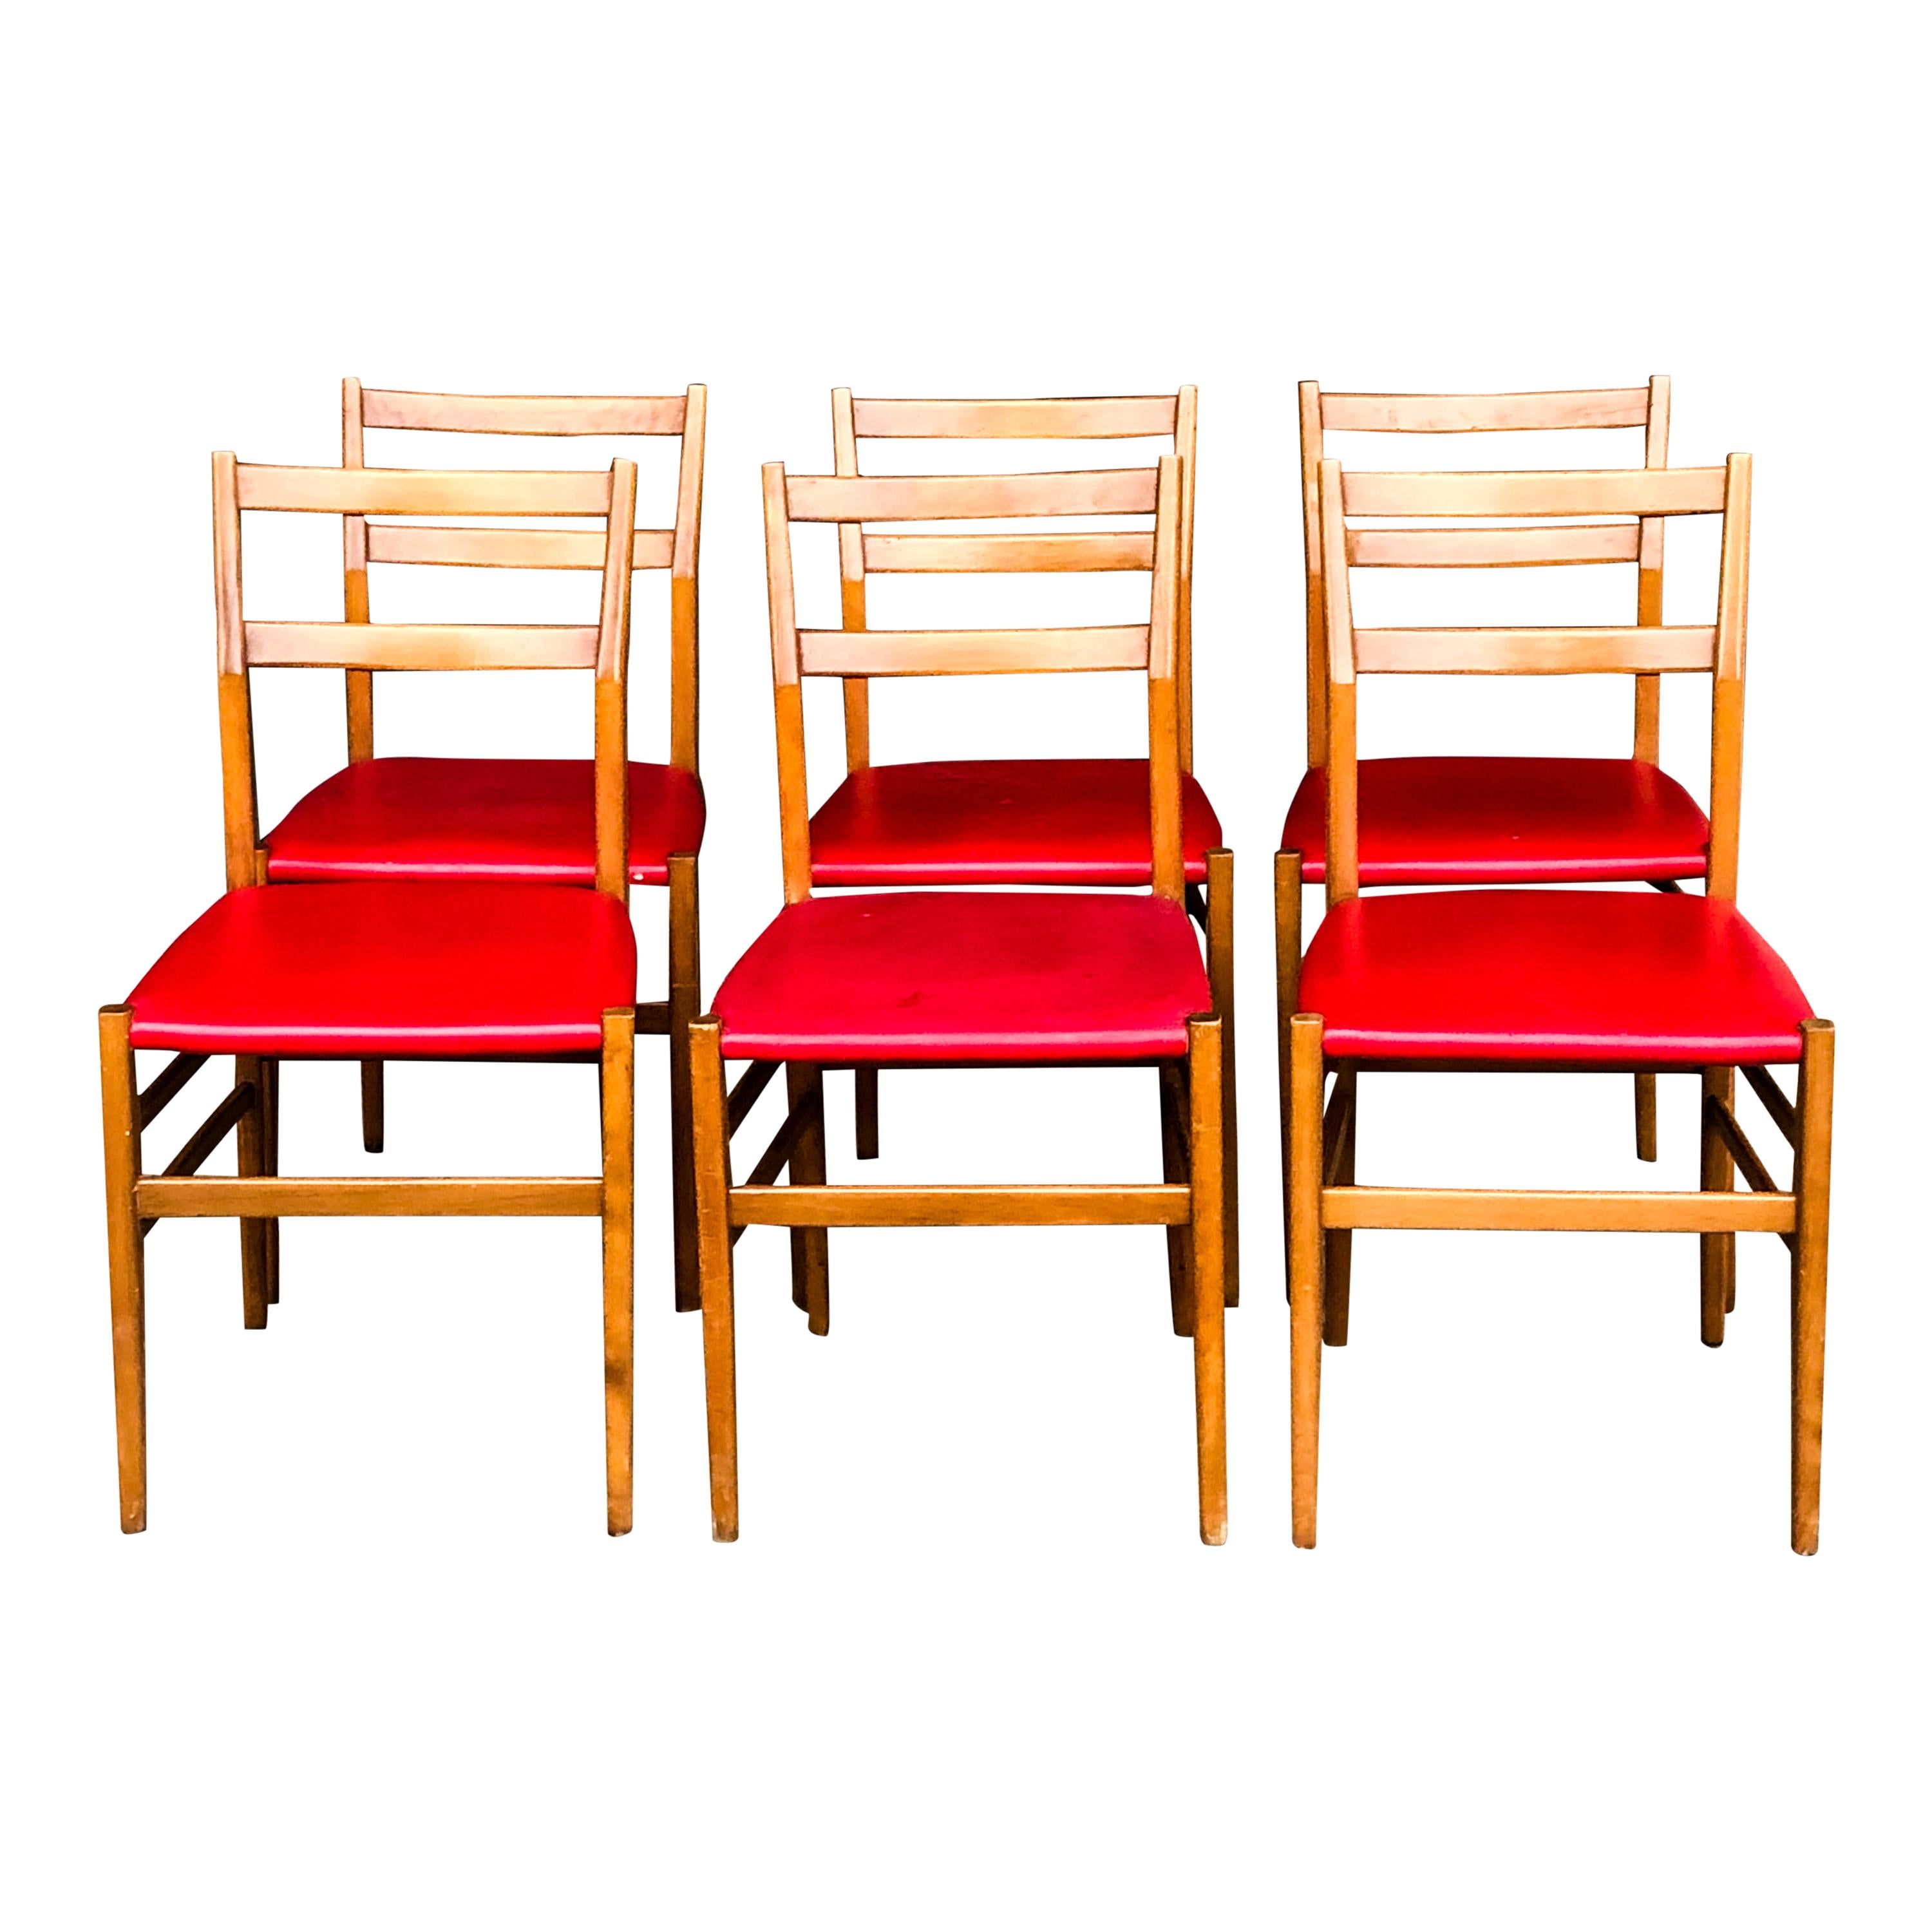 Mid-Century Modern Red Faux Leather Leggera Dining Chairs by Gio Ponti for Cassina, 1960s, Set of 6 For Sale